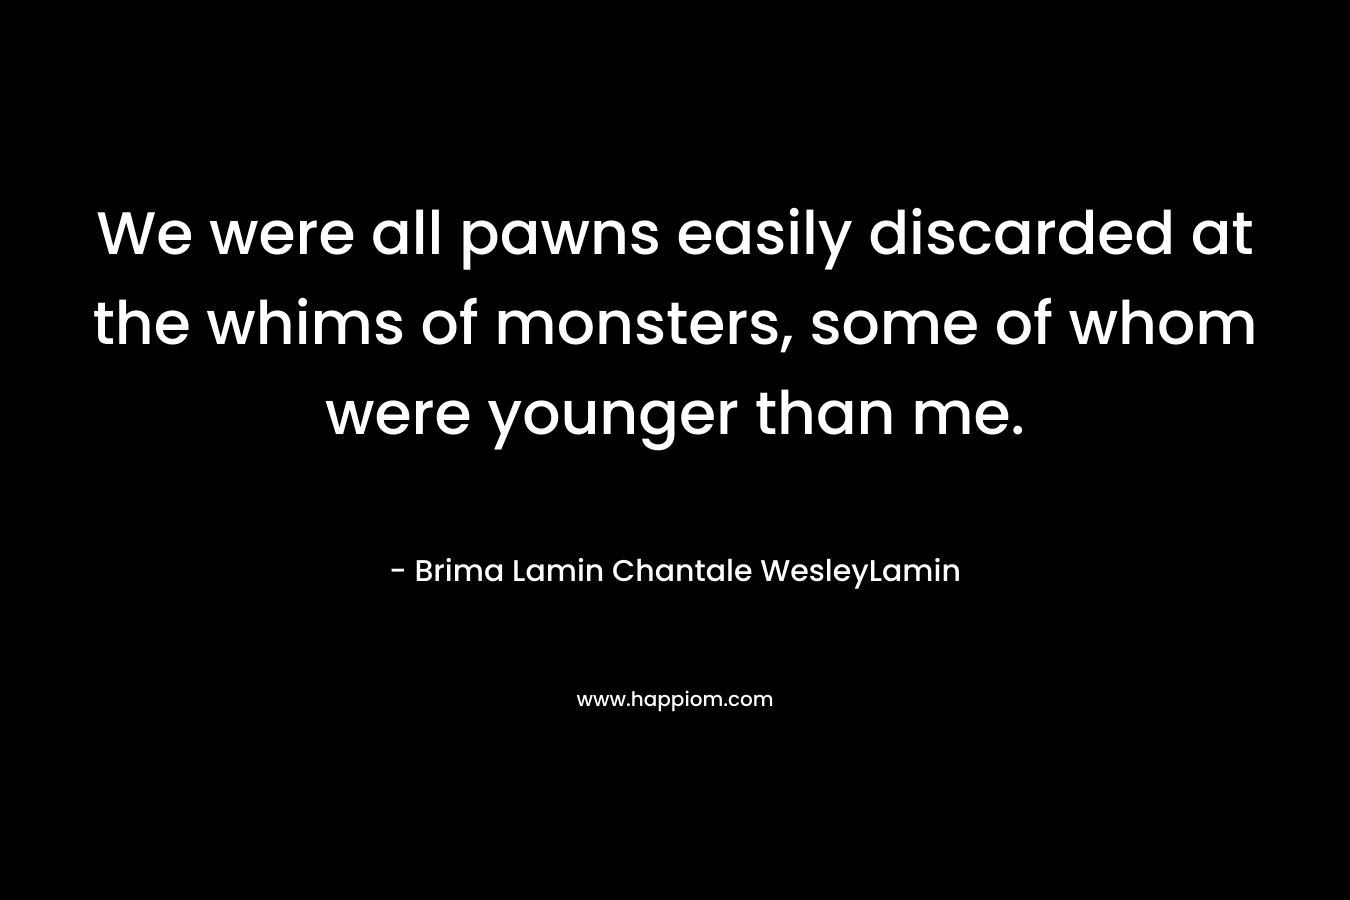 We were all pawns easily discarded at the whims of monsters, some of whom were younger than me.